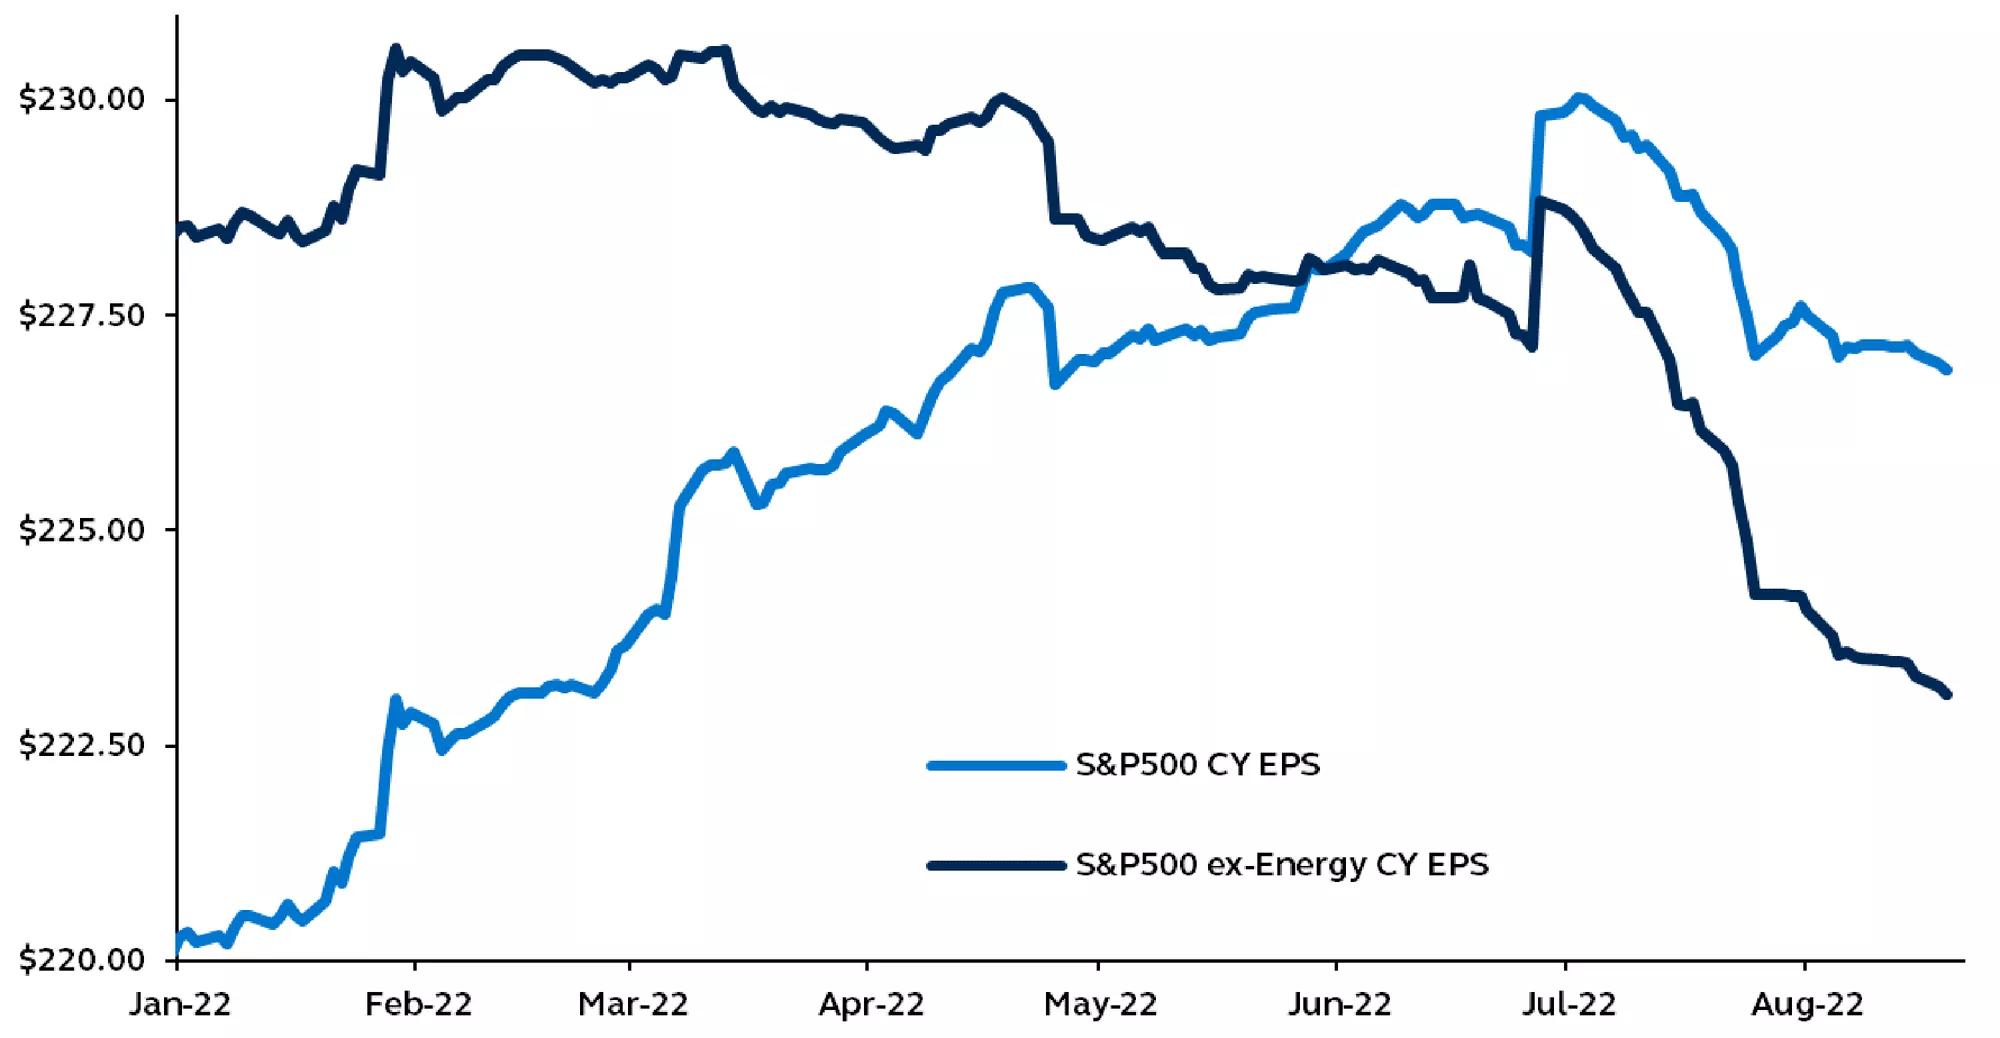 S&P 500 earnings estimates per share from January 2022 to present